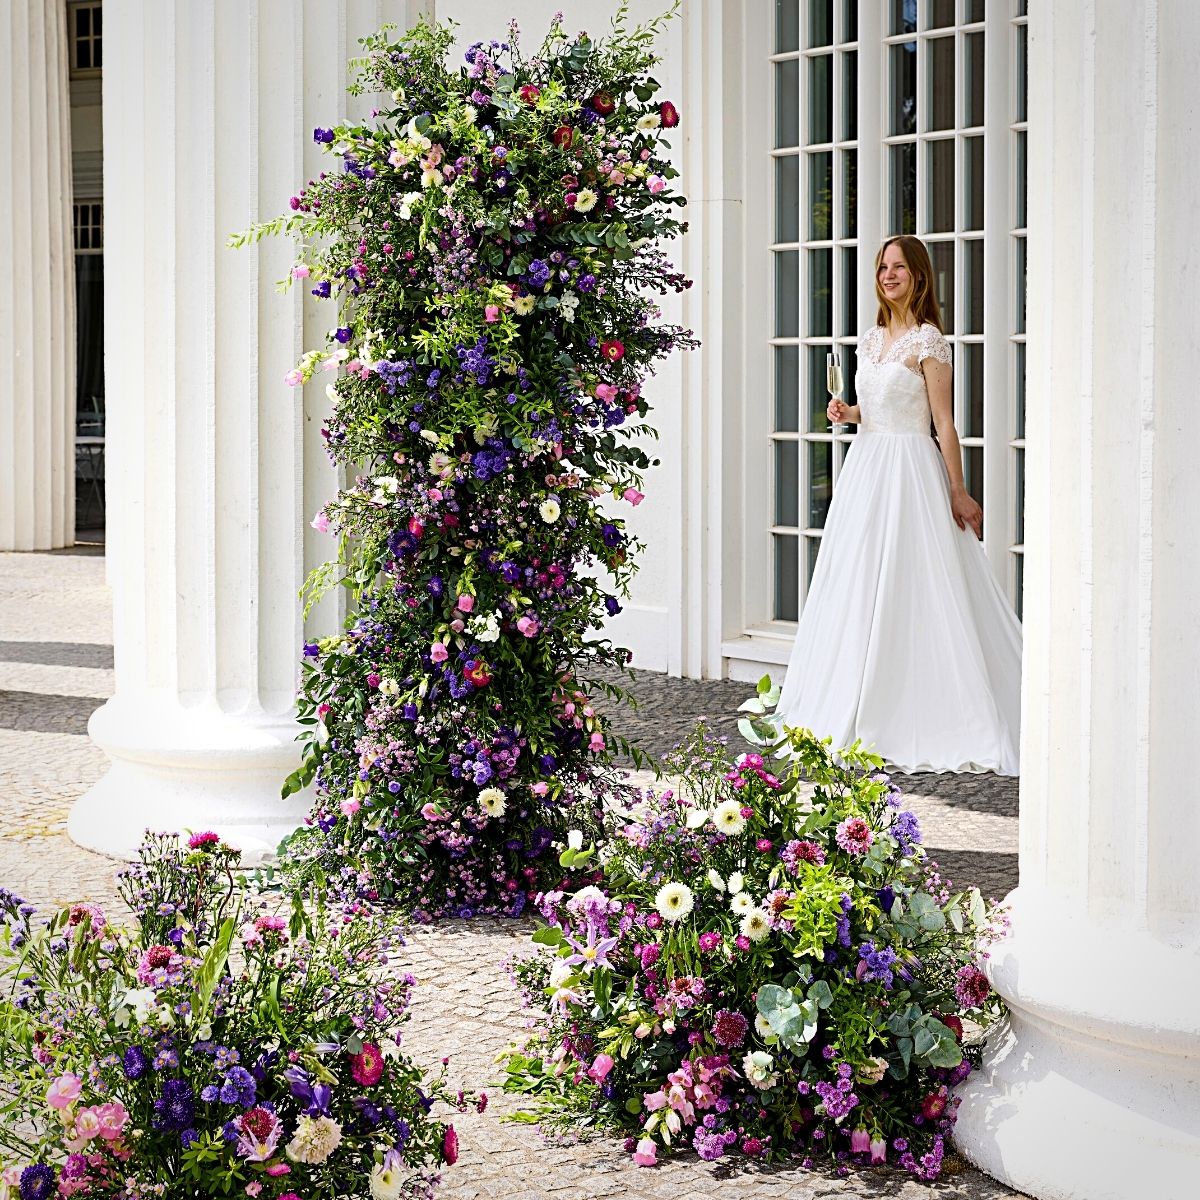 Marginpar’s Asters, Supplied by Fleurametz Are the Stars in This Wedding Design by BLOOM’s